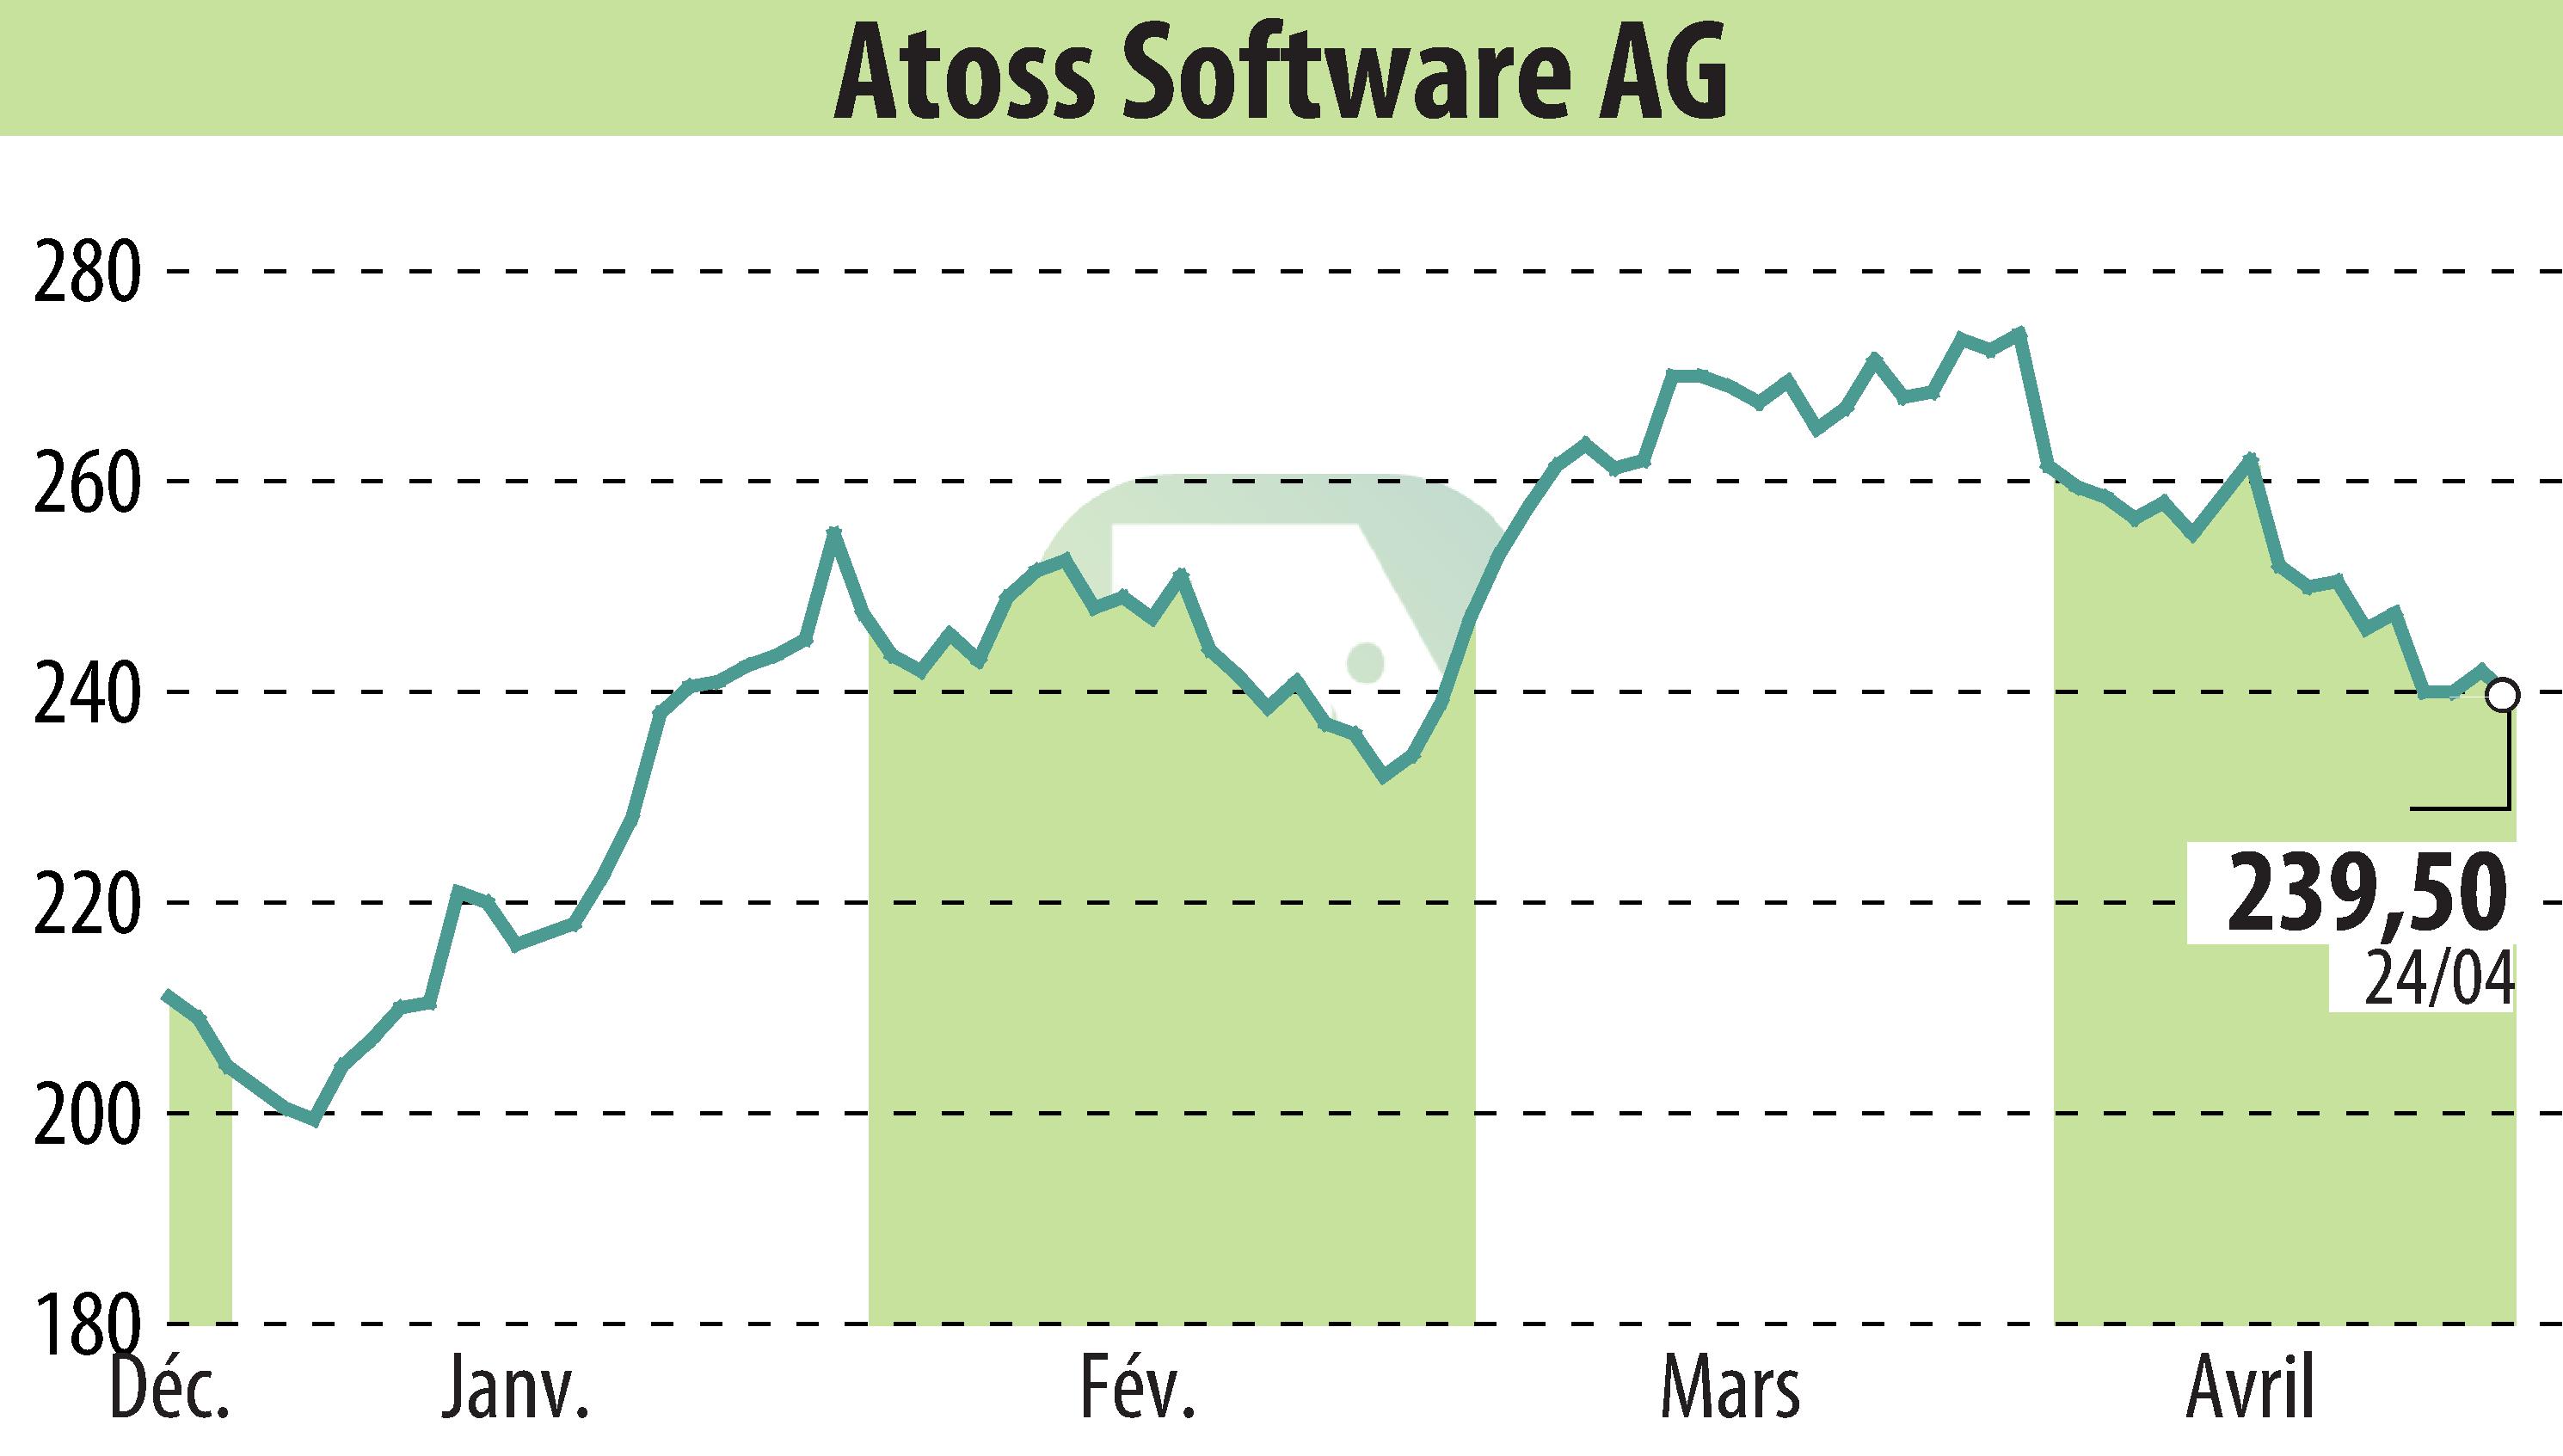 Stock price chart of ATOSS Software AG (EBR:AOF) showing fluctuations.